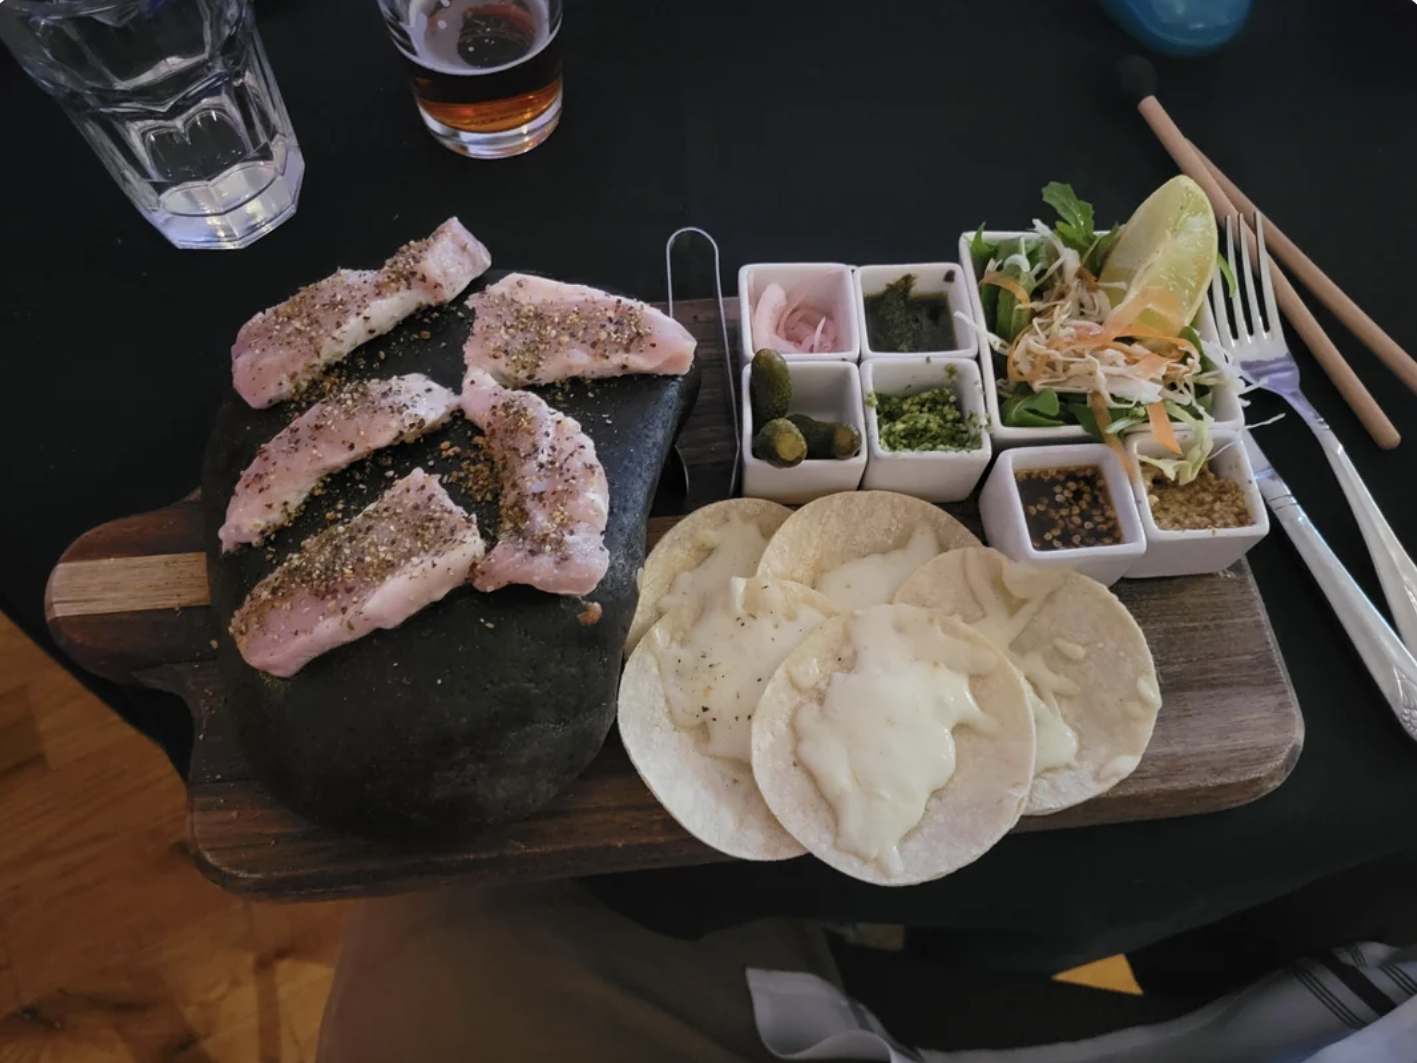 A meal set with chicken, tortillas, and various toppings on a wooden board